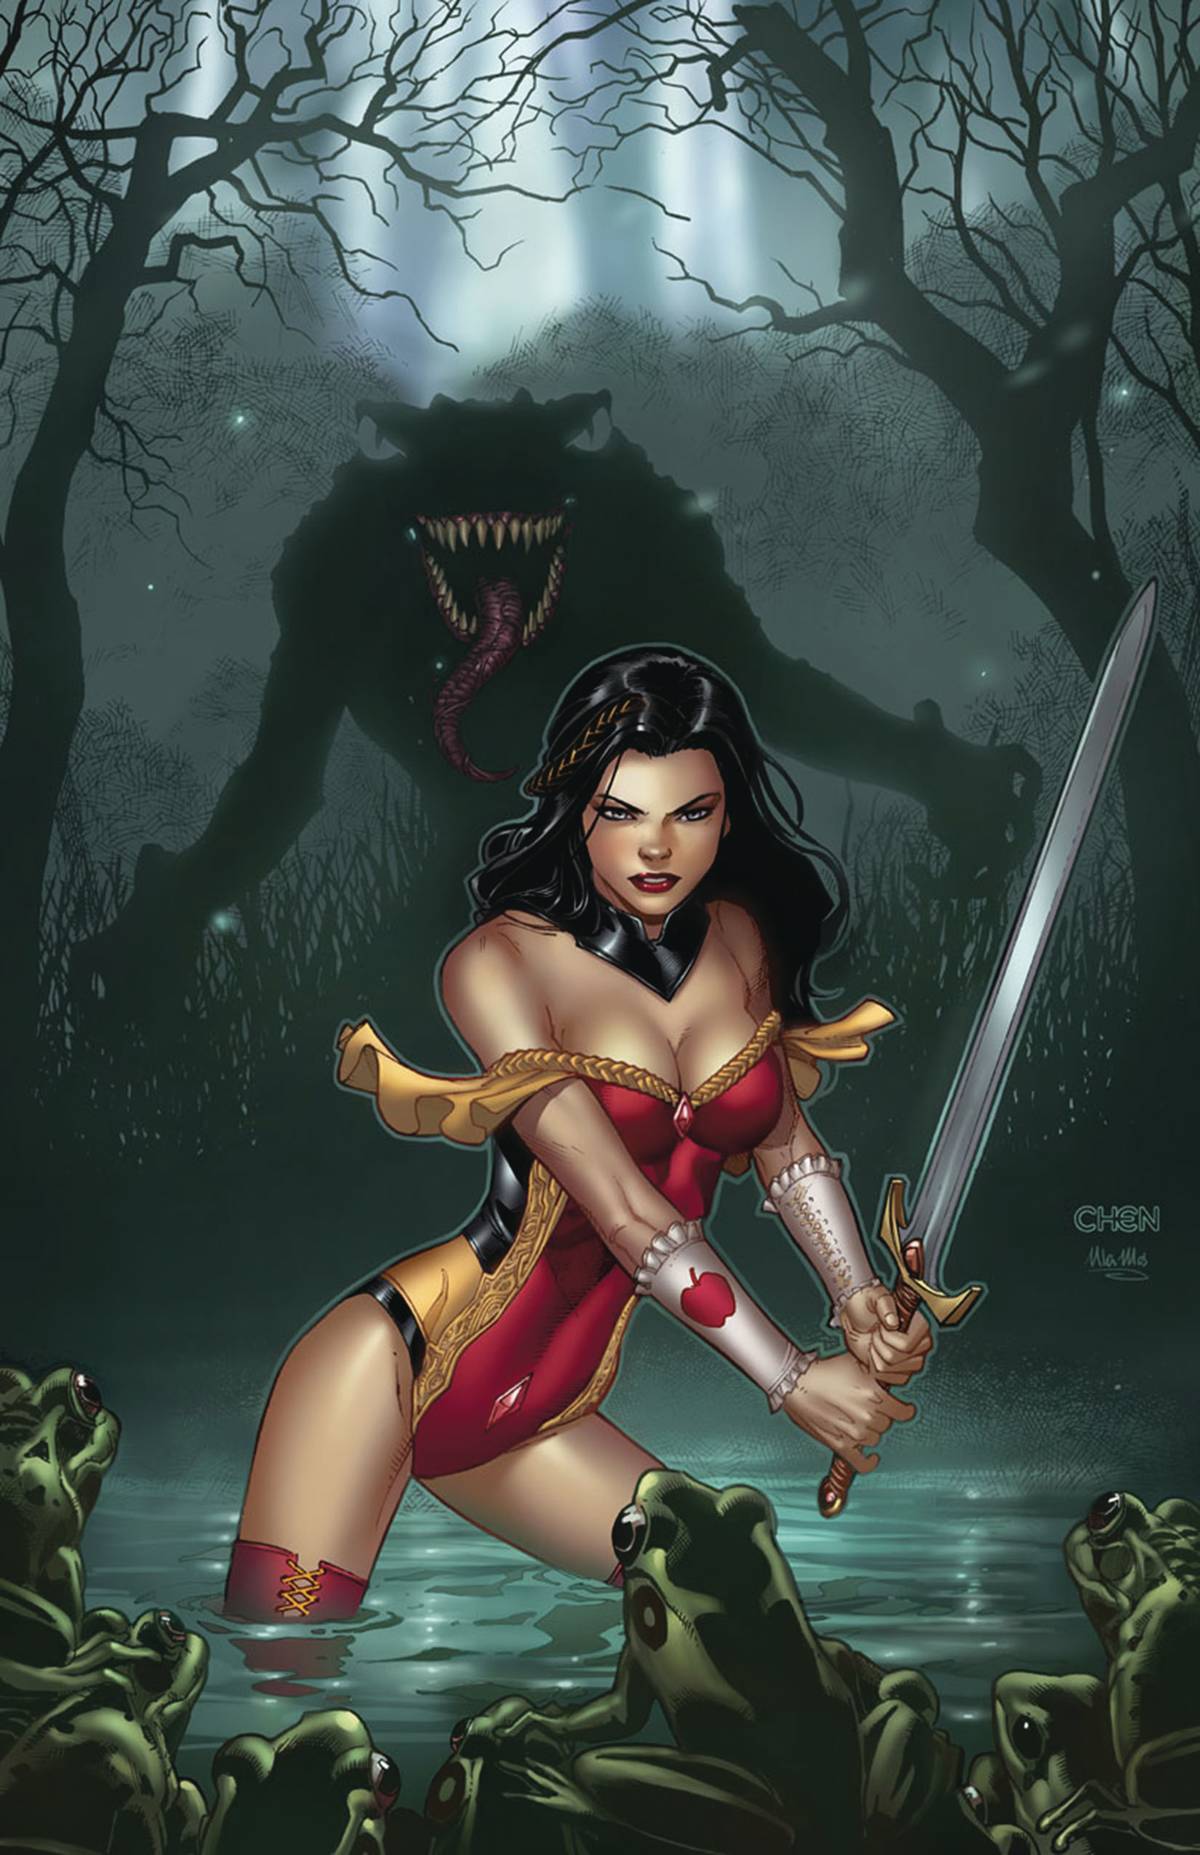 Grimm Fairy Tales #4 Cover A Chen